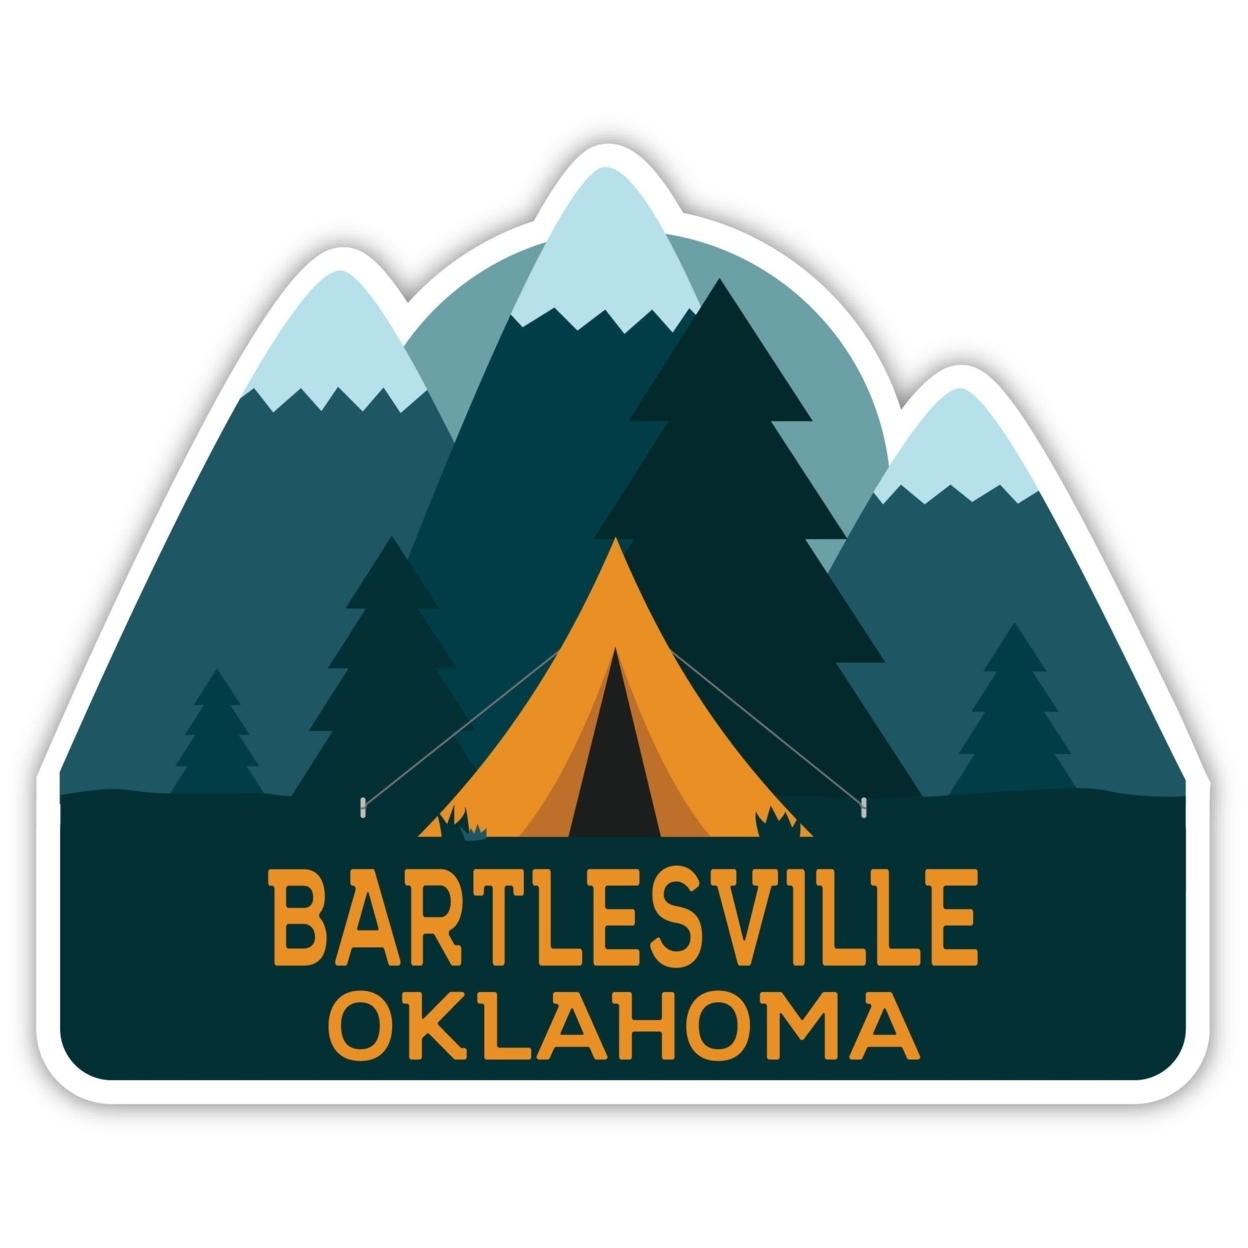 Bartlesville Oklahoma Souvenir Decorative Stickers (Choose Theme And Size) - 4-Pack, 12-Inch, Tent